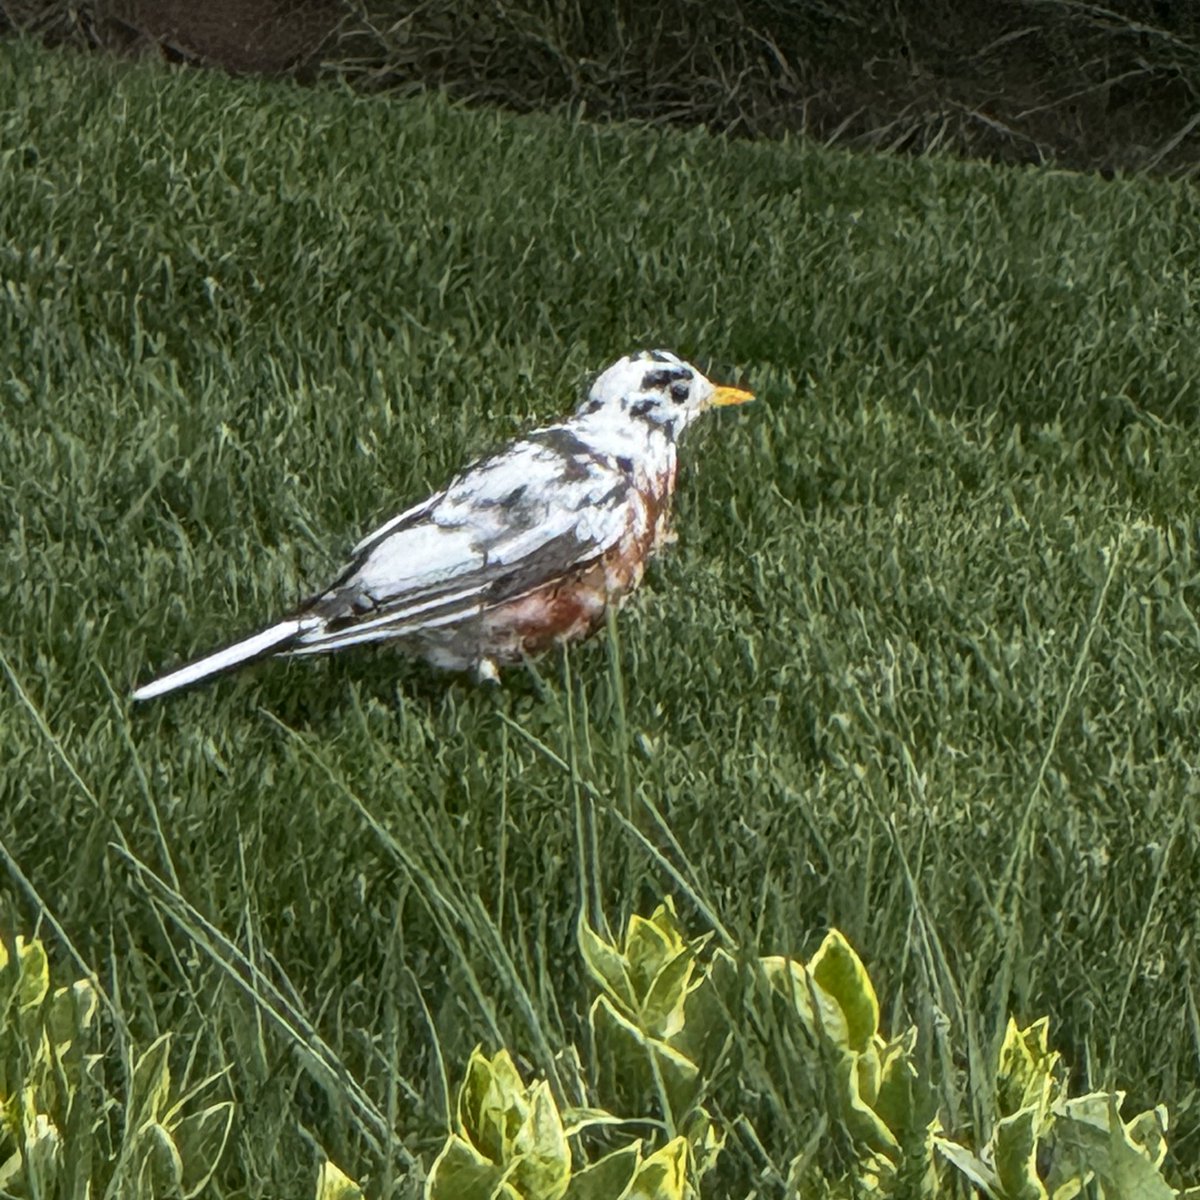 We have a leucistic robin that’s been hanging out in our yard.